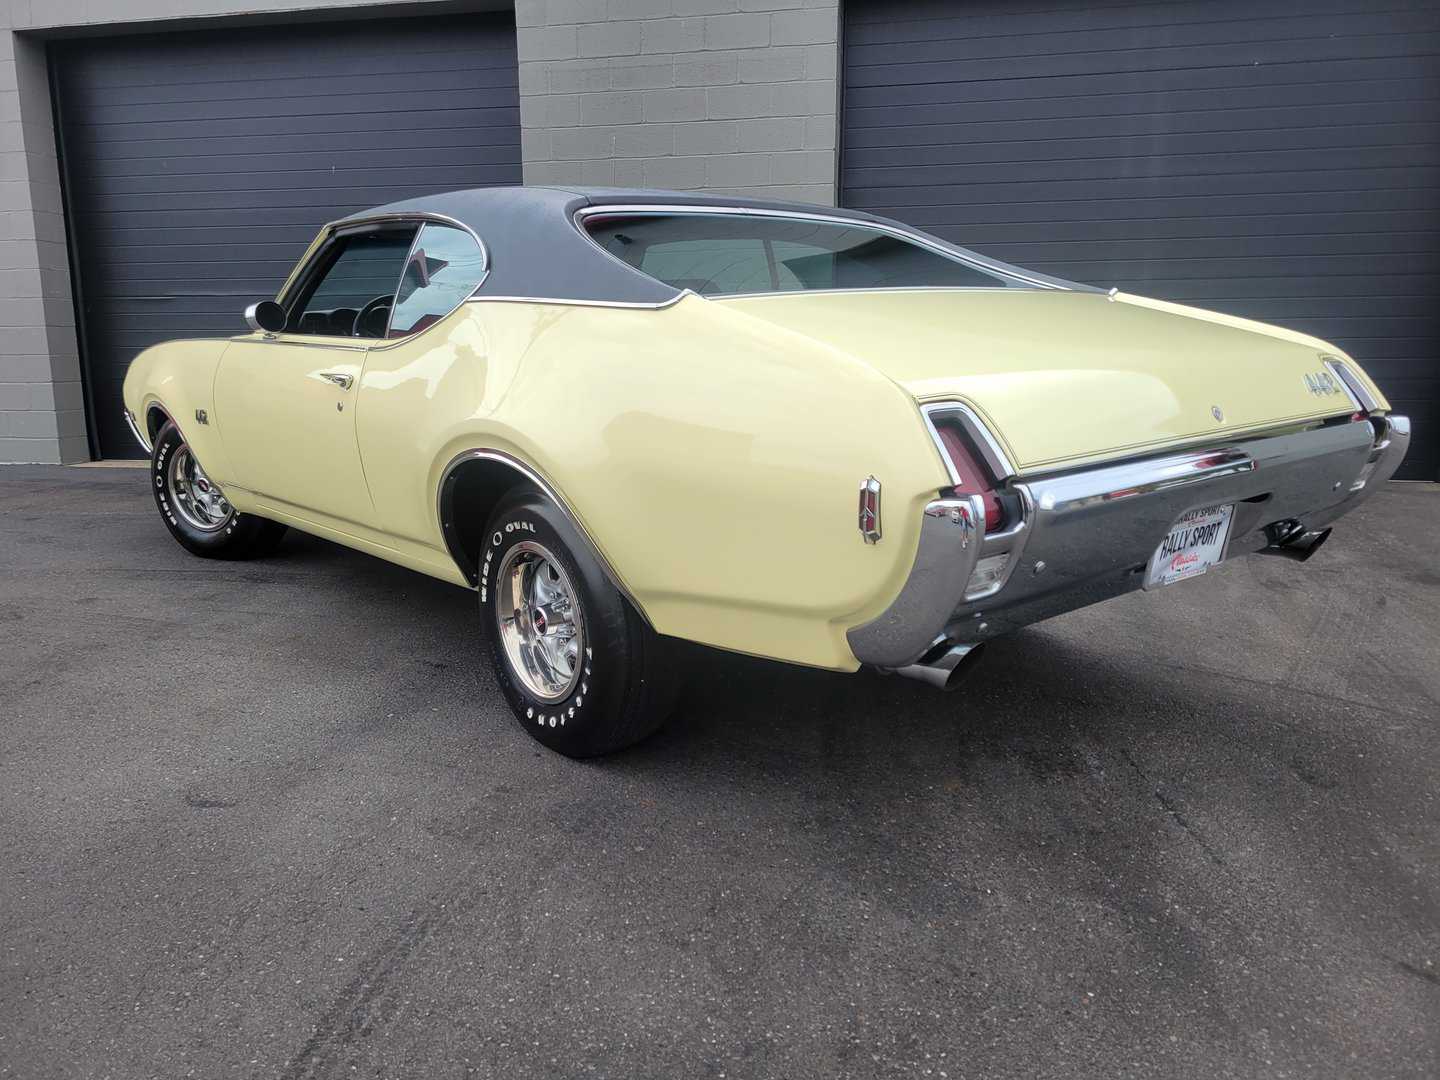 A 1969 yellow Oldsmobile 442 muscle car parked in front of a garage.